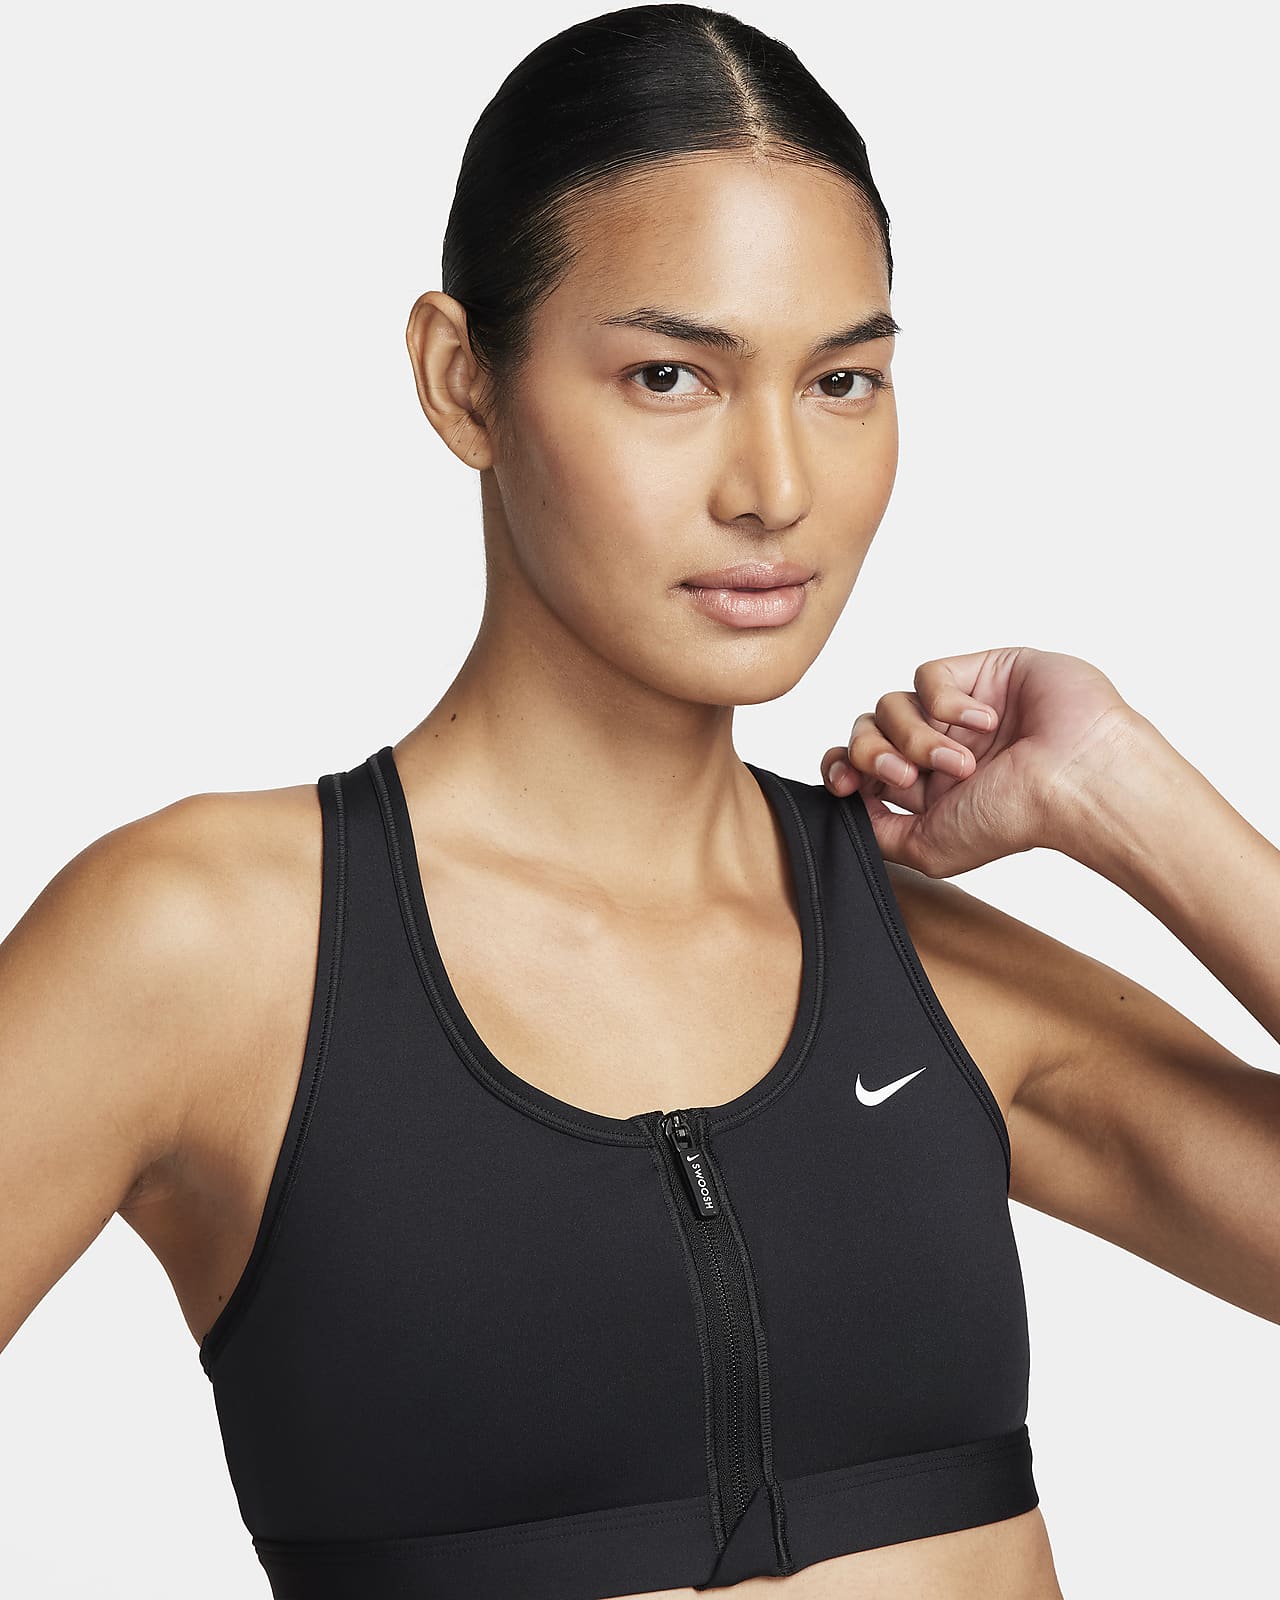 Nike releases new sports bra featuring adaptive technology.